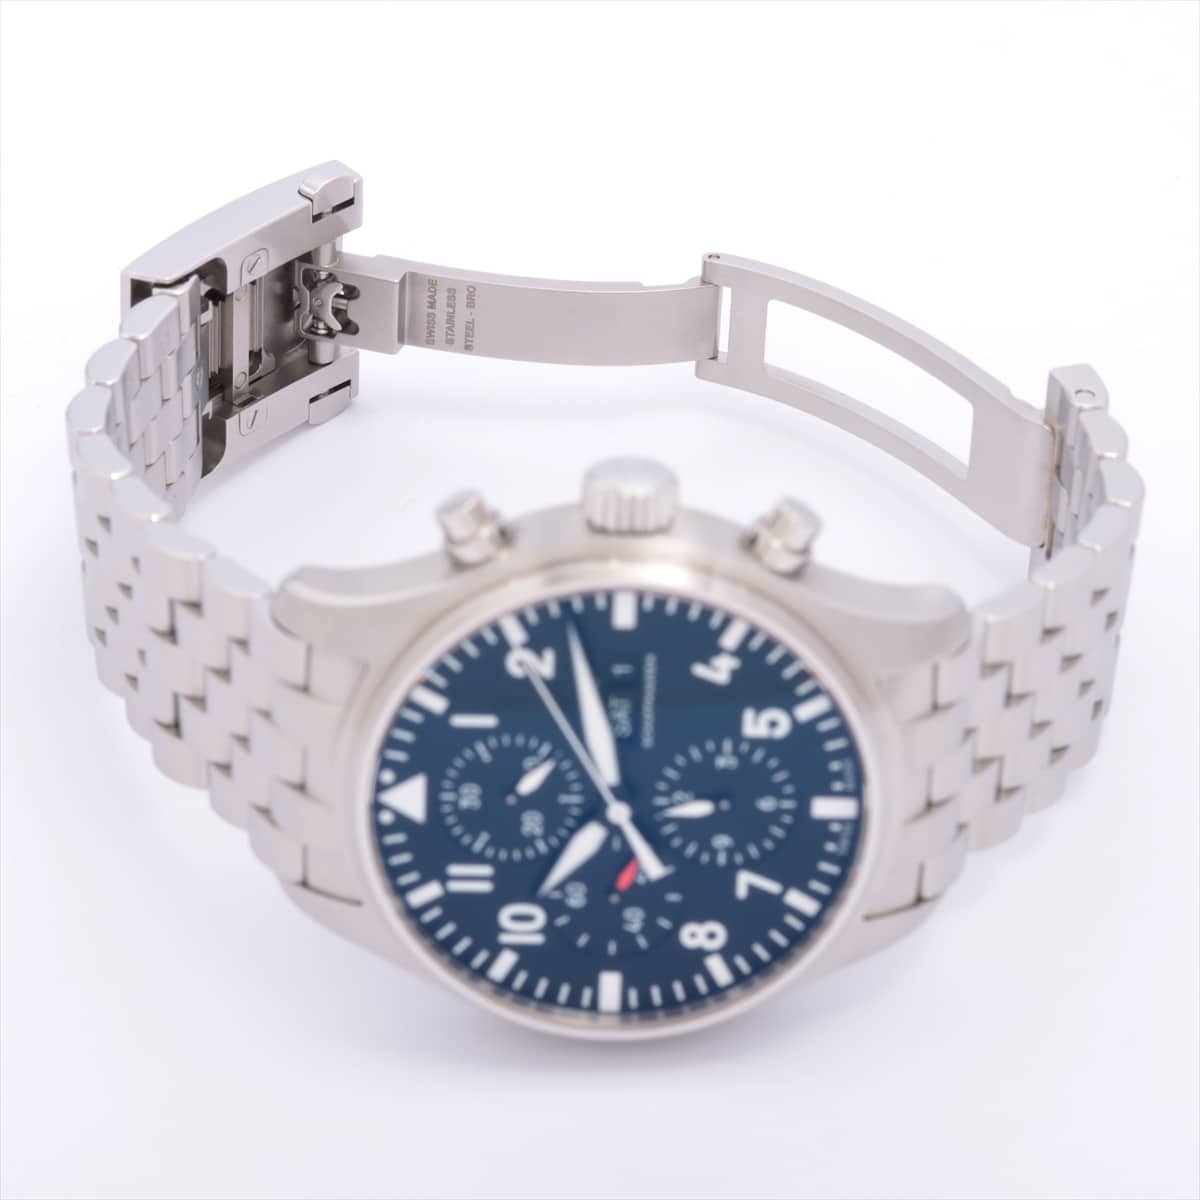 IWC Pilot Watch Chronograph IW377710 SS AT Black-Face Extra Link 1